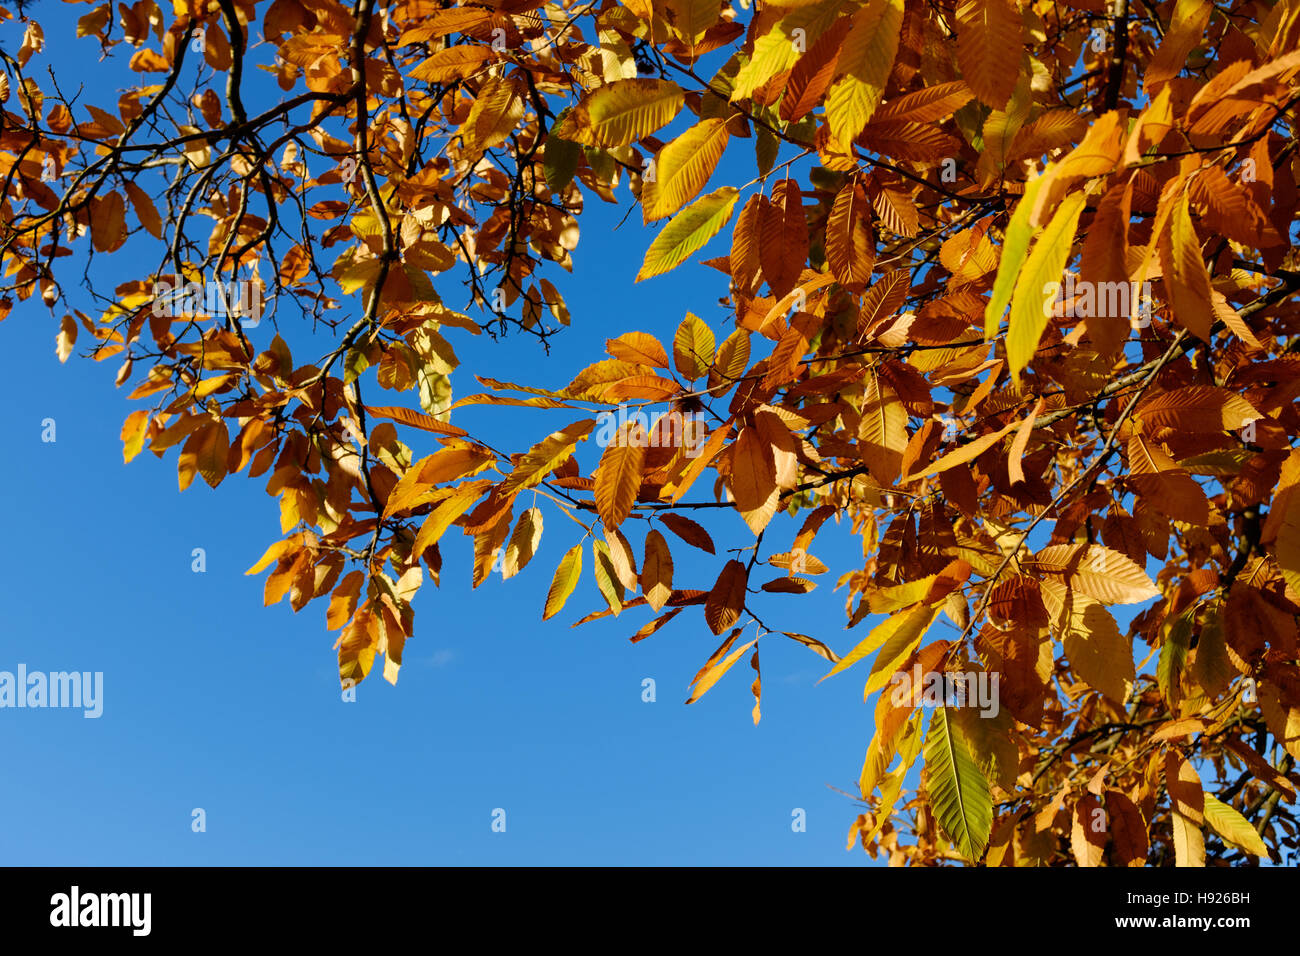 Golden autumn leaves against a bright blue sky Stock Photo